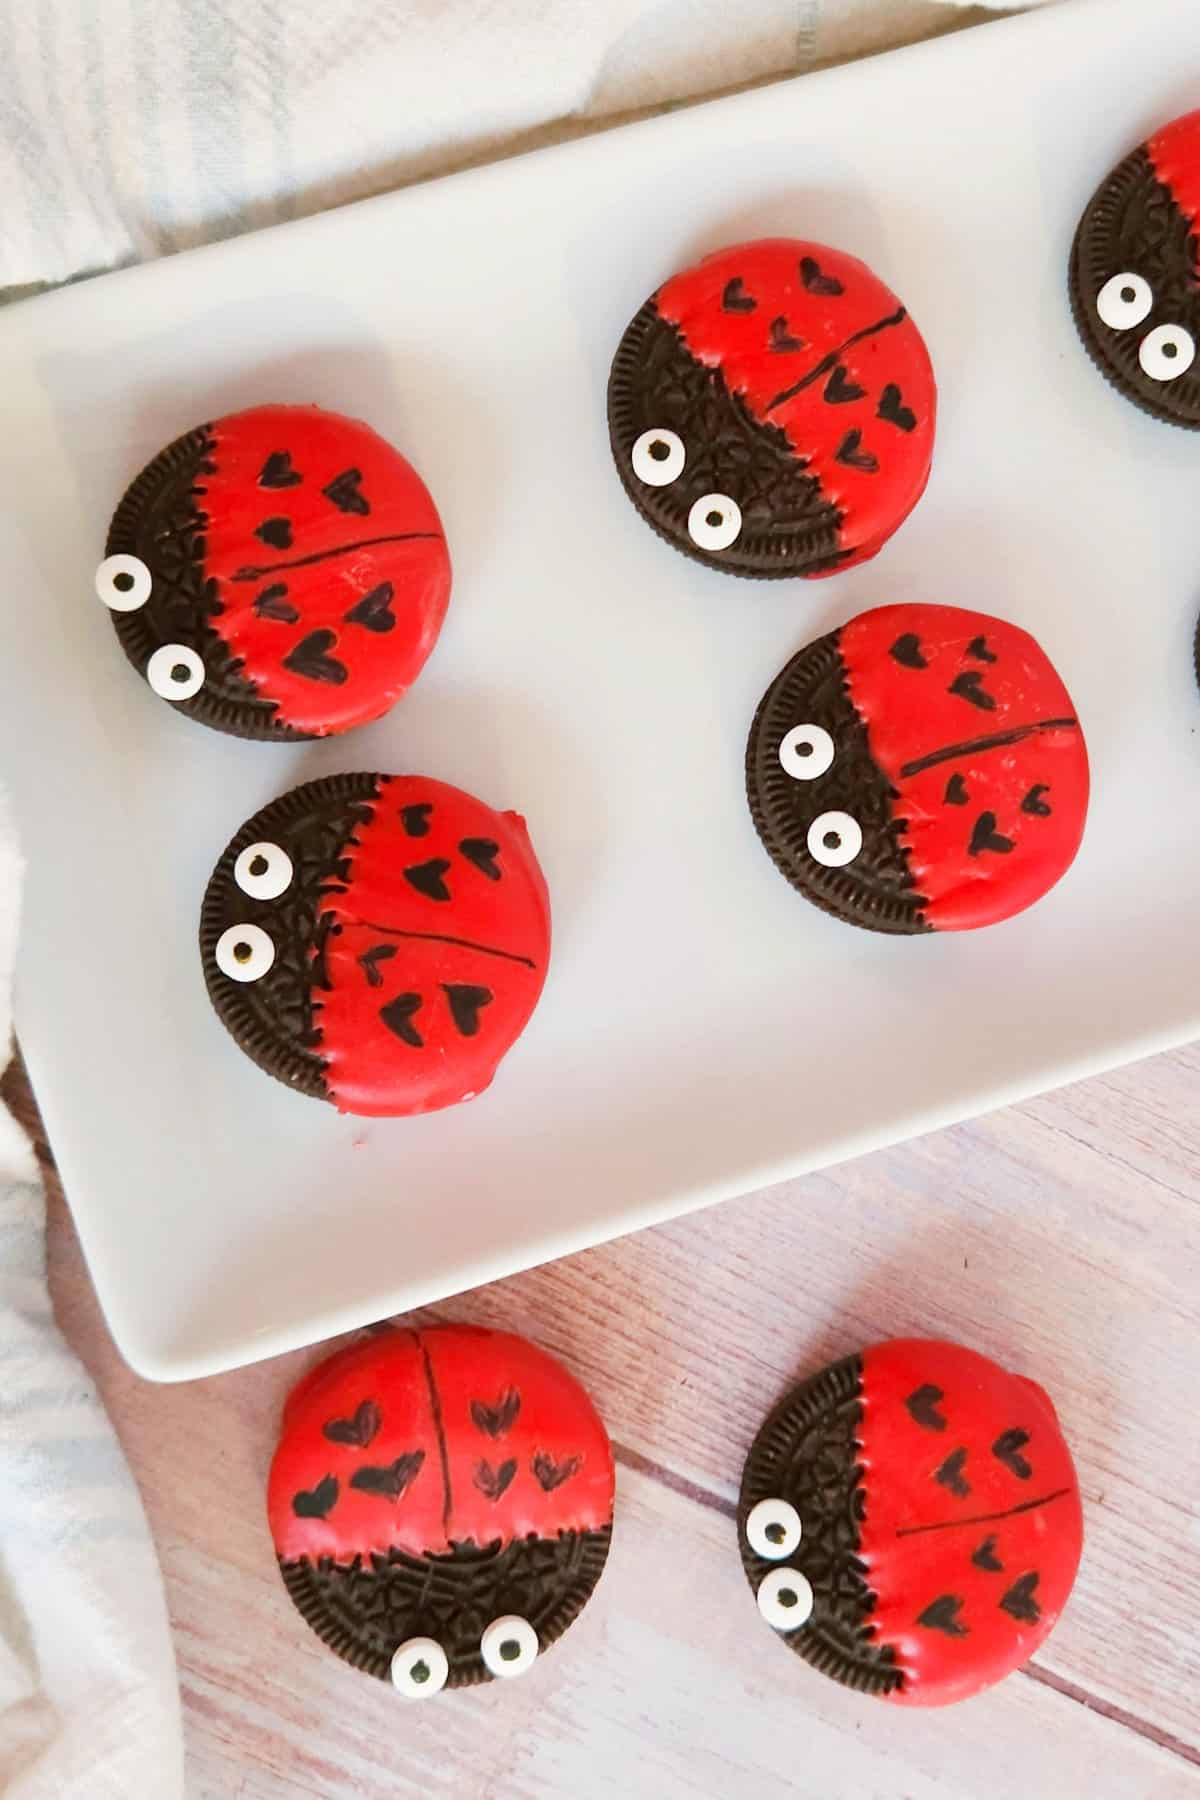 Oreo cookies decorated like love bugs arranged on a white platter.